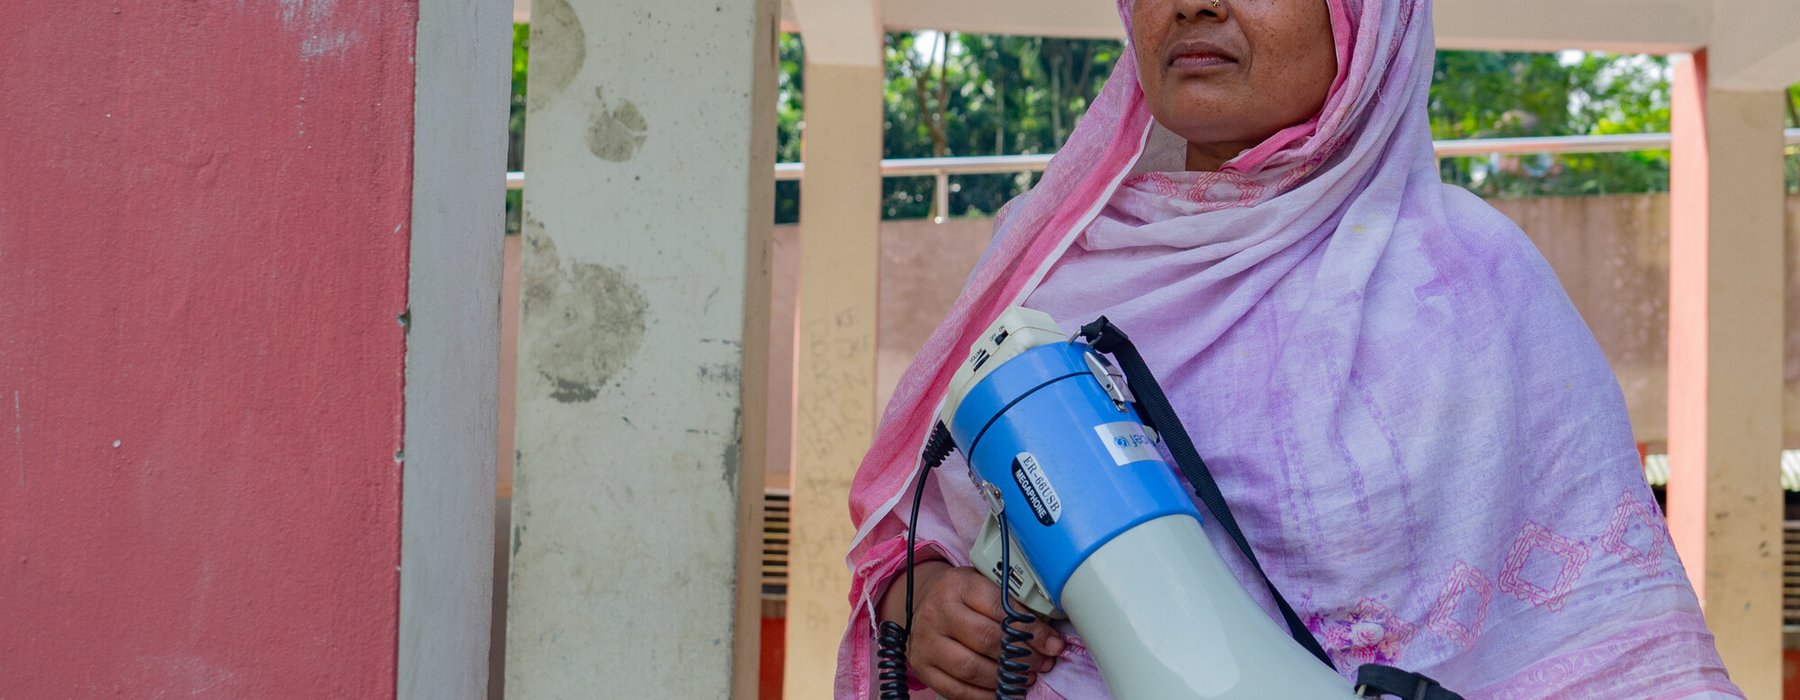 Dulu is wearing a pink hijab and holds a blue megaphone outside a village building.